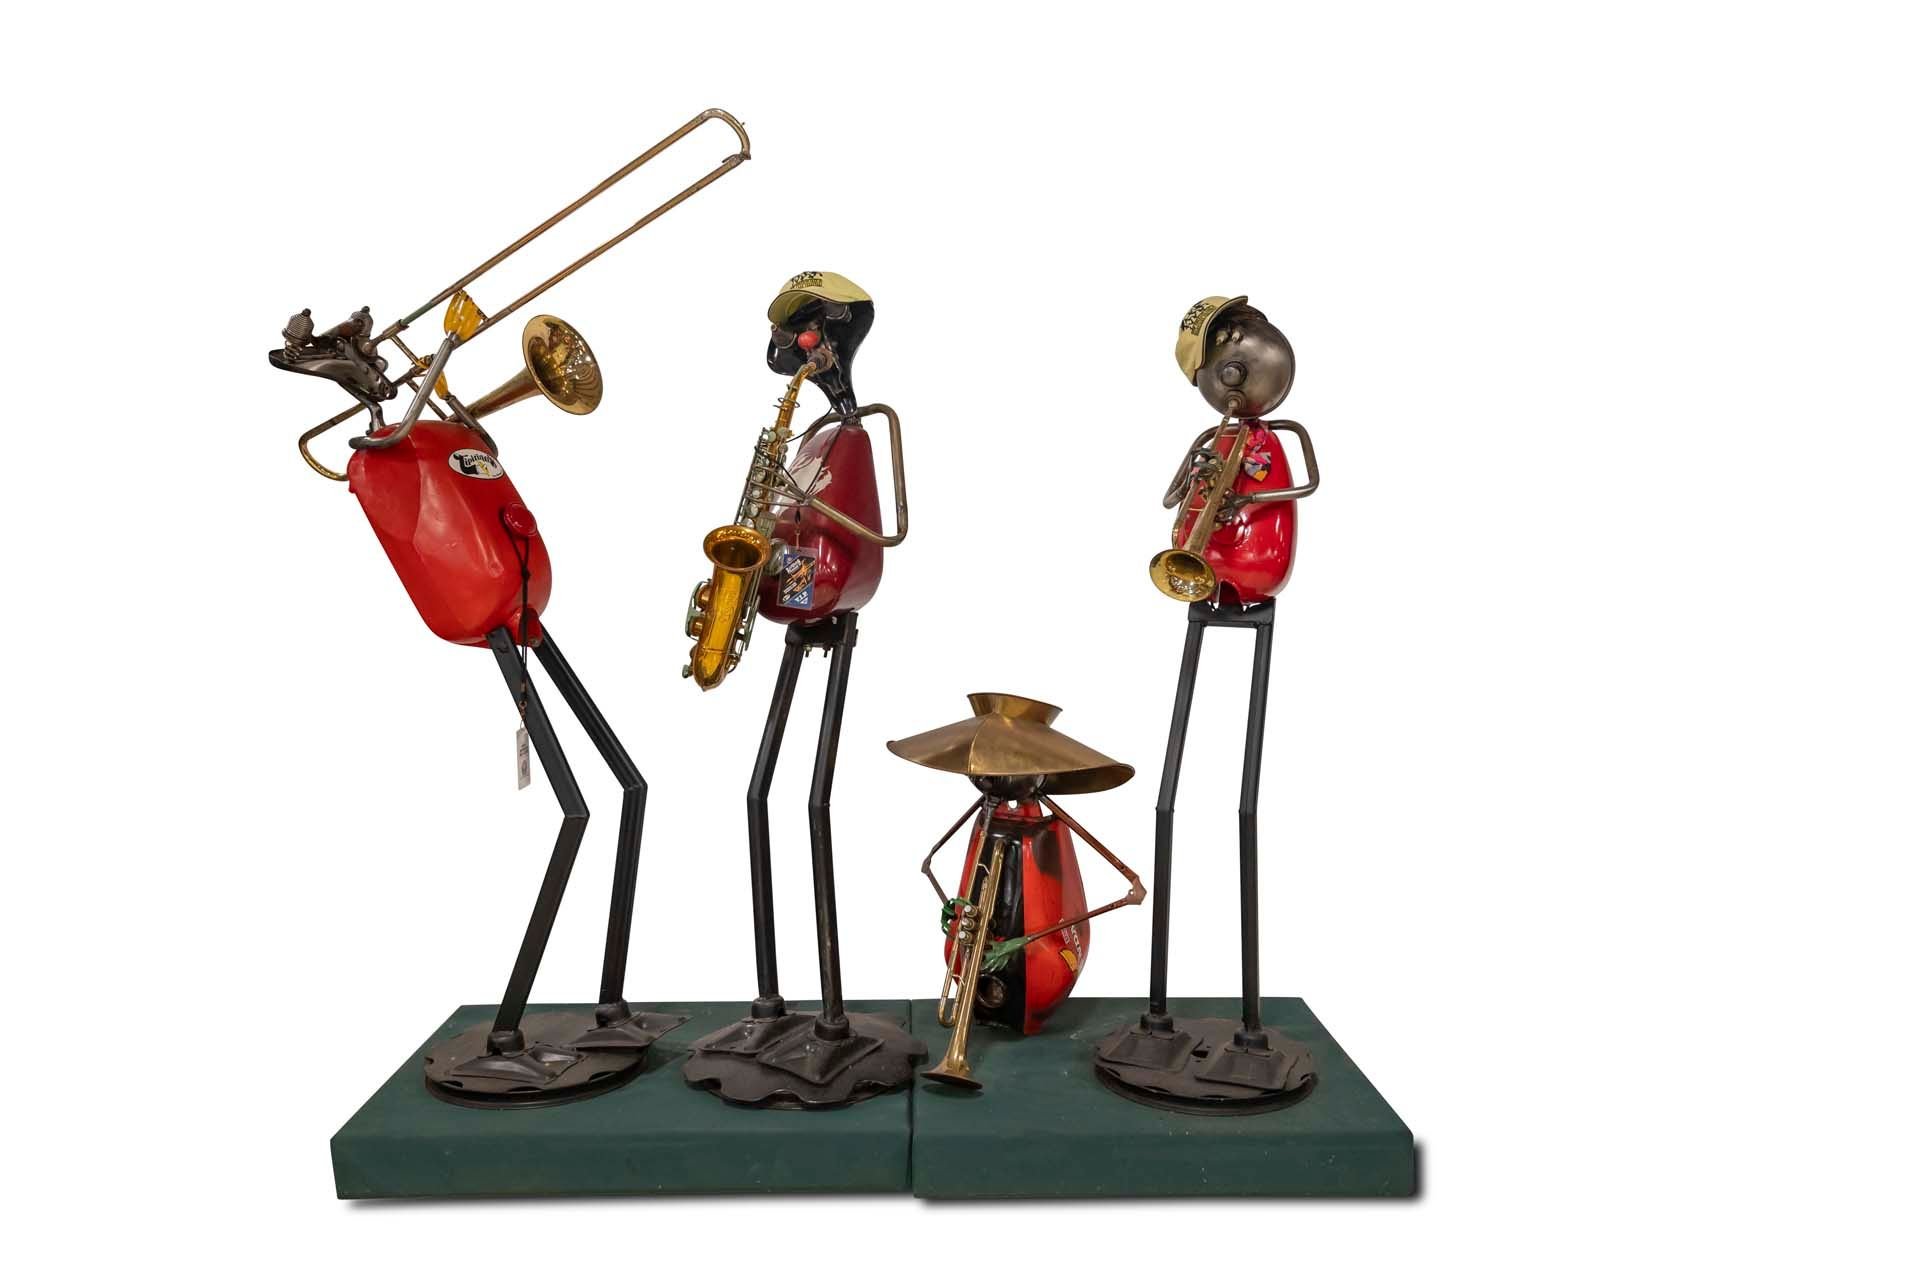 Broad Arrow Auctions | Upcycled Motor Cycle Parts into Large Jazz Band Figurines